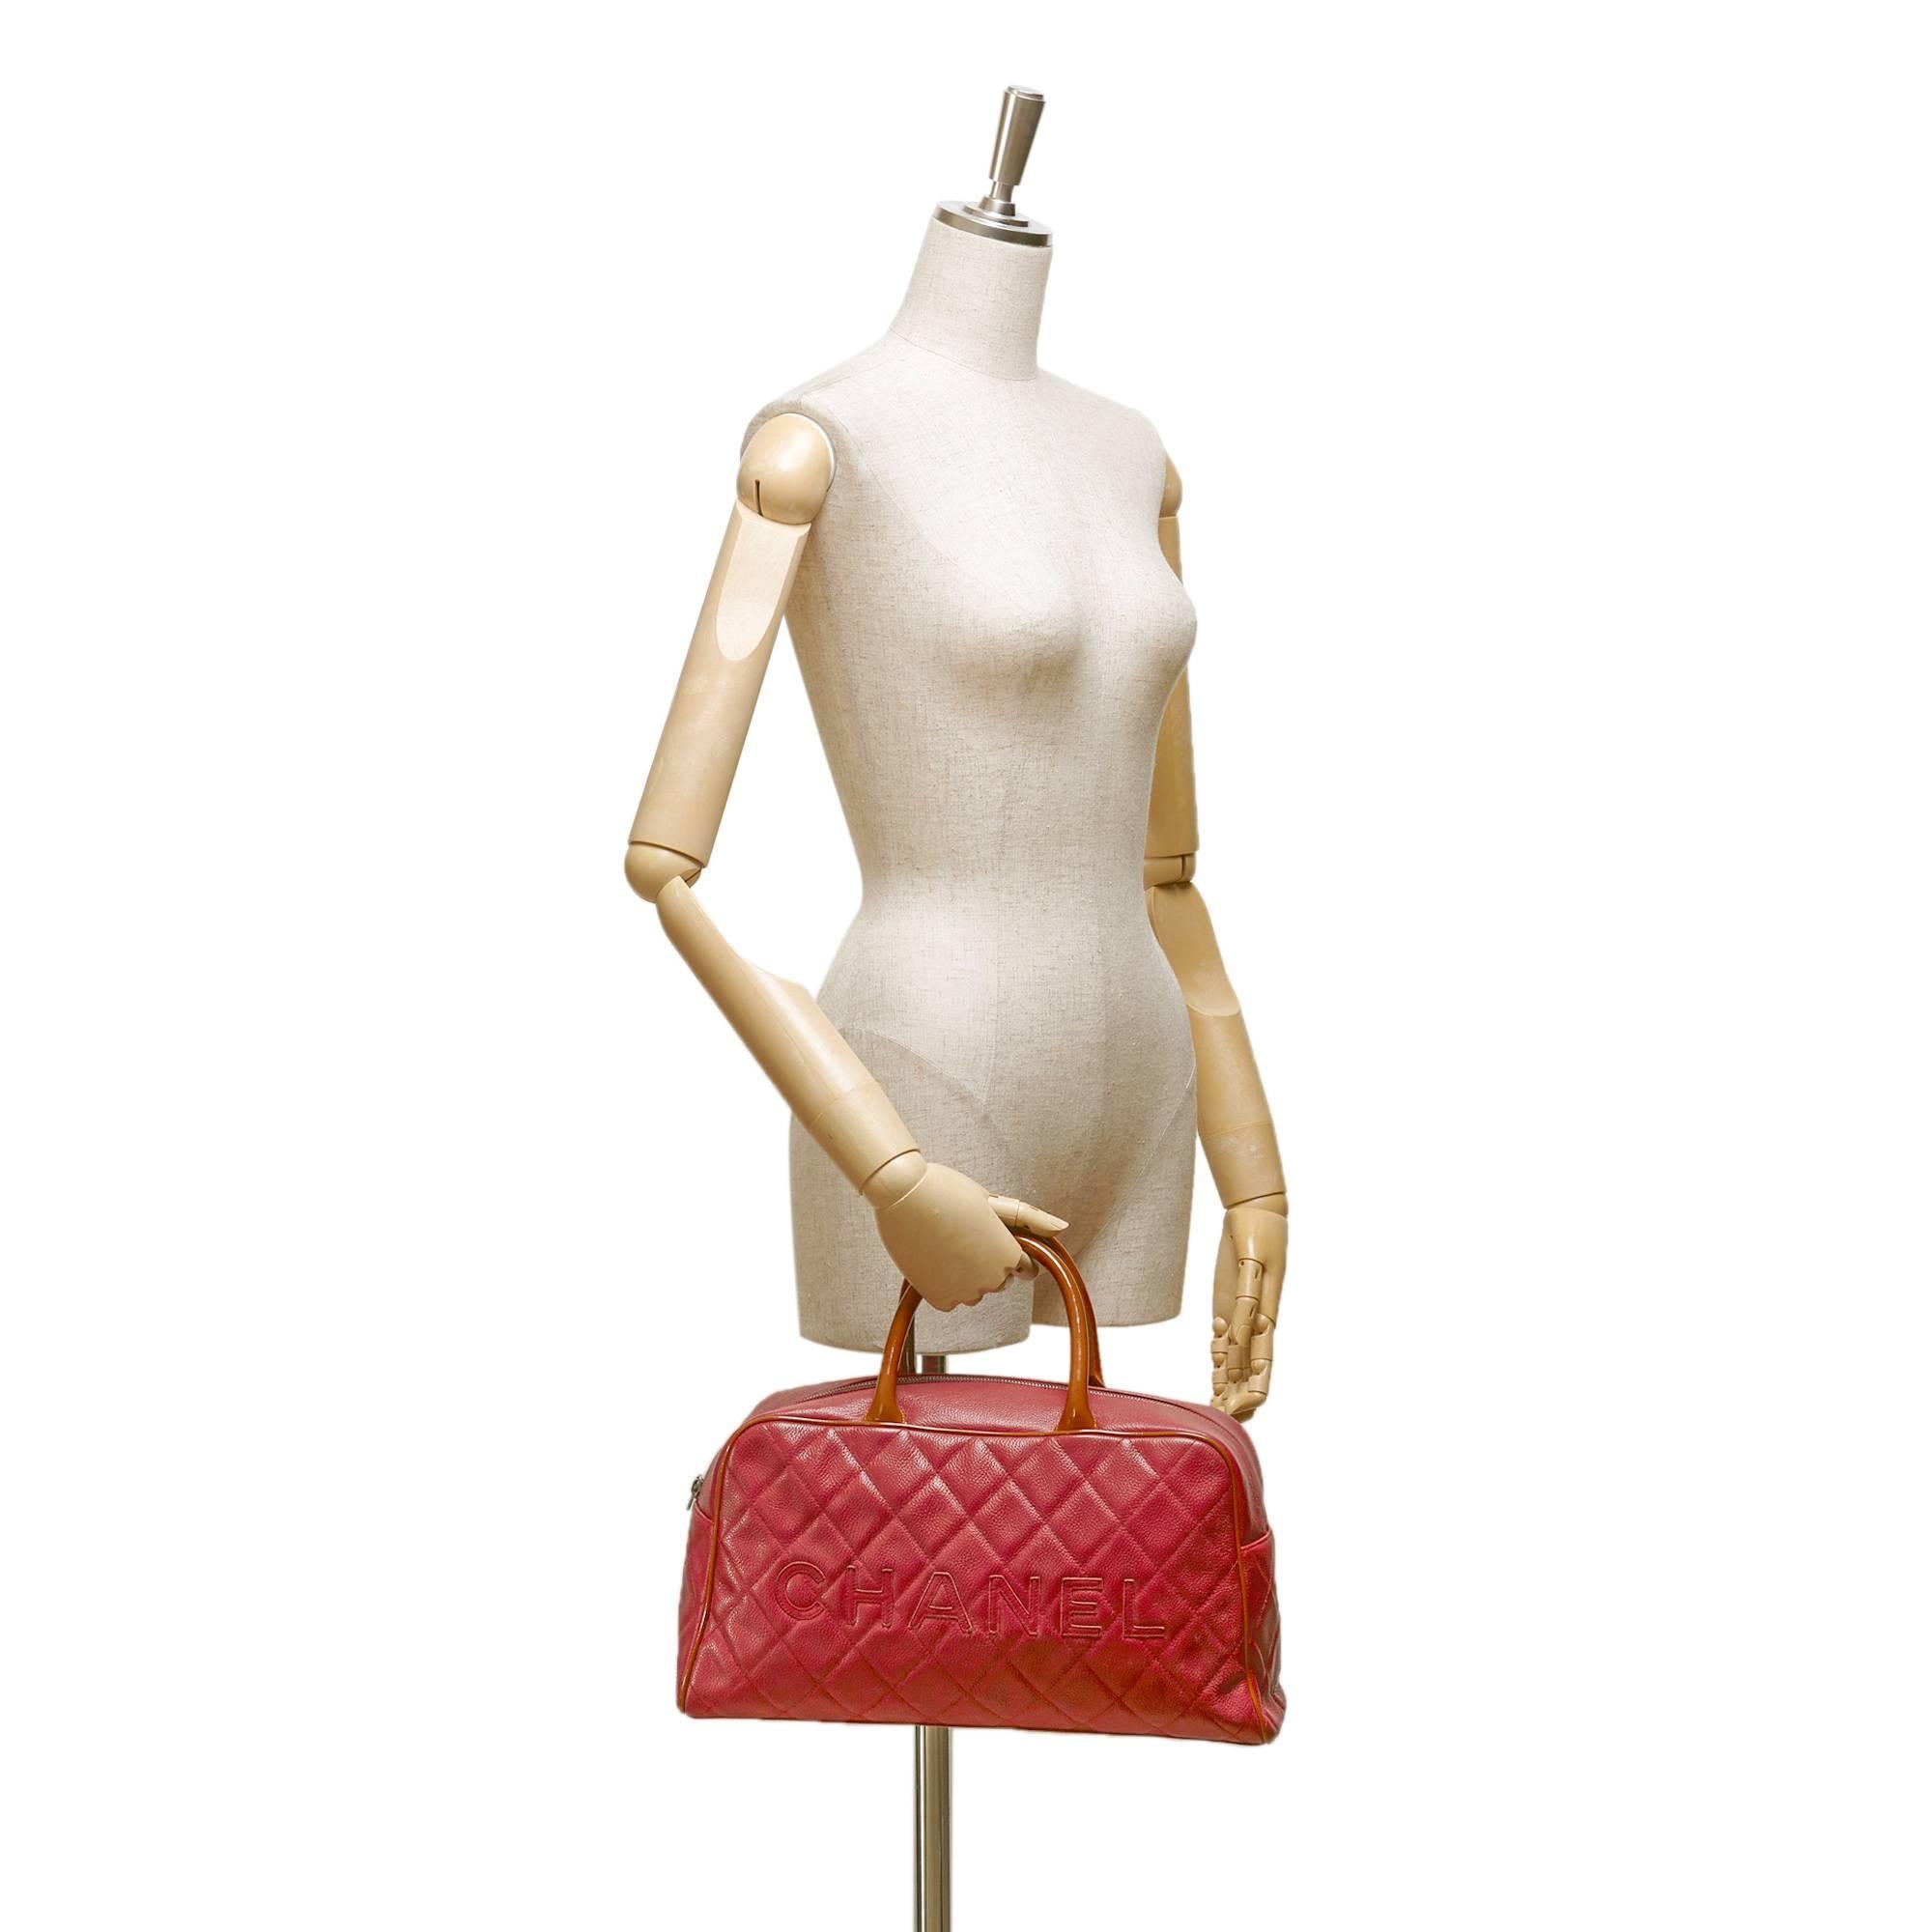 - This Chanel pink Matelasse logo bowling handbag features a leather body, exterior back zip pocket, orange patent leather rolled leather handles, top zip closure, and interior zip pocket. This great colour combination Chanel bowling bag is rare.